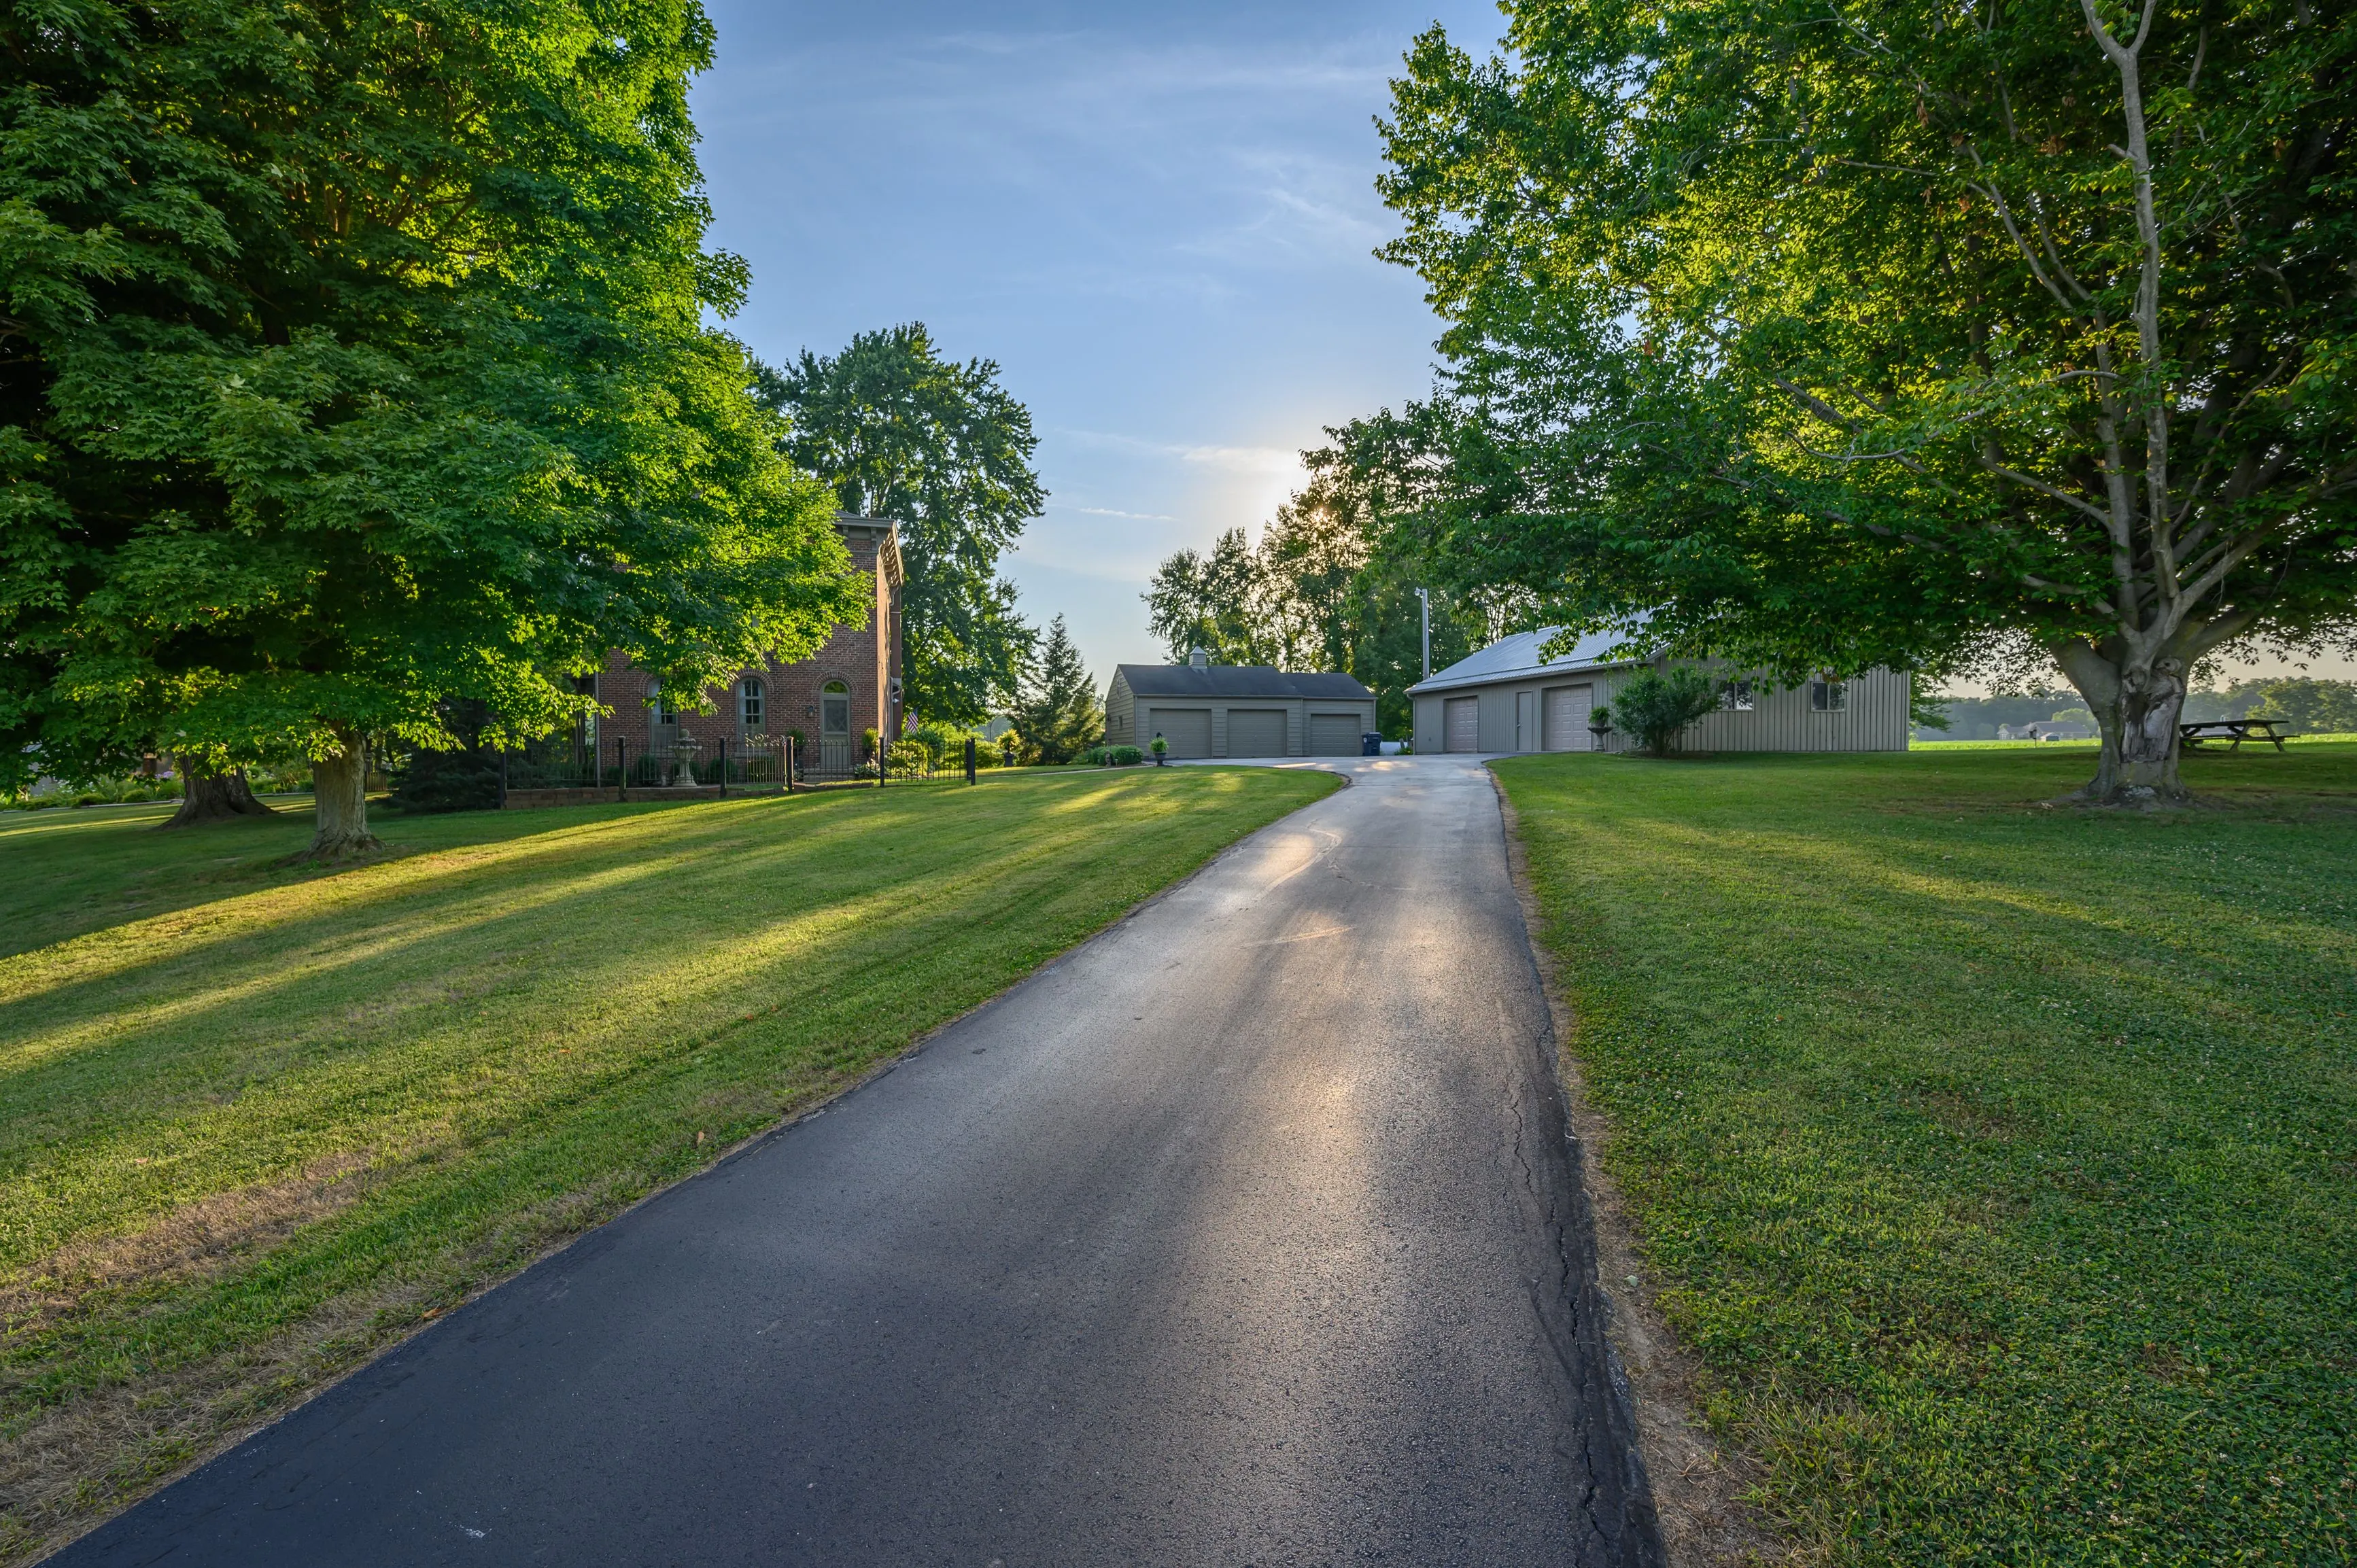 A tree-lined driveway leading to buildings with a setting sun casting a glow on the landscape.